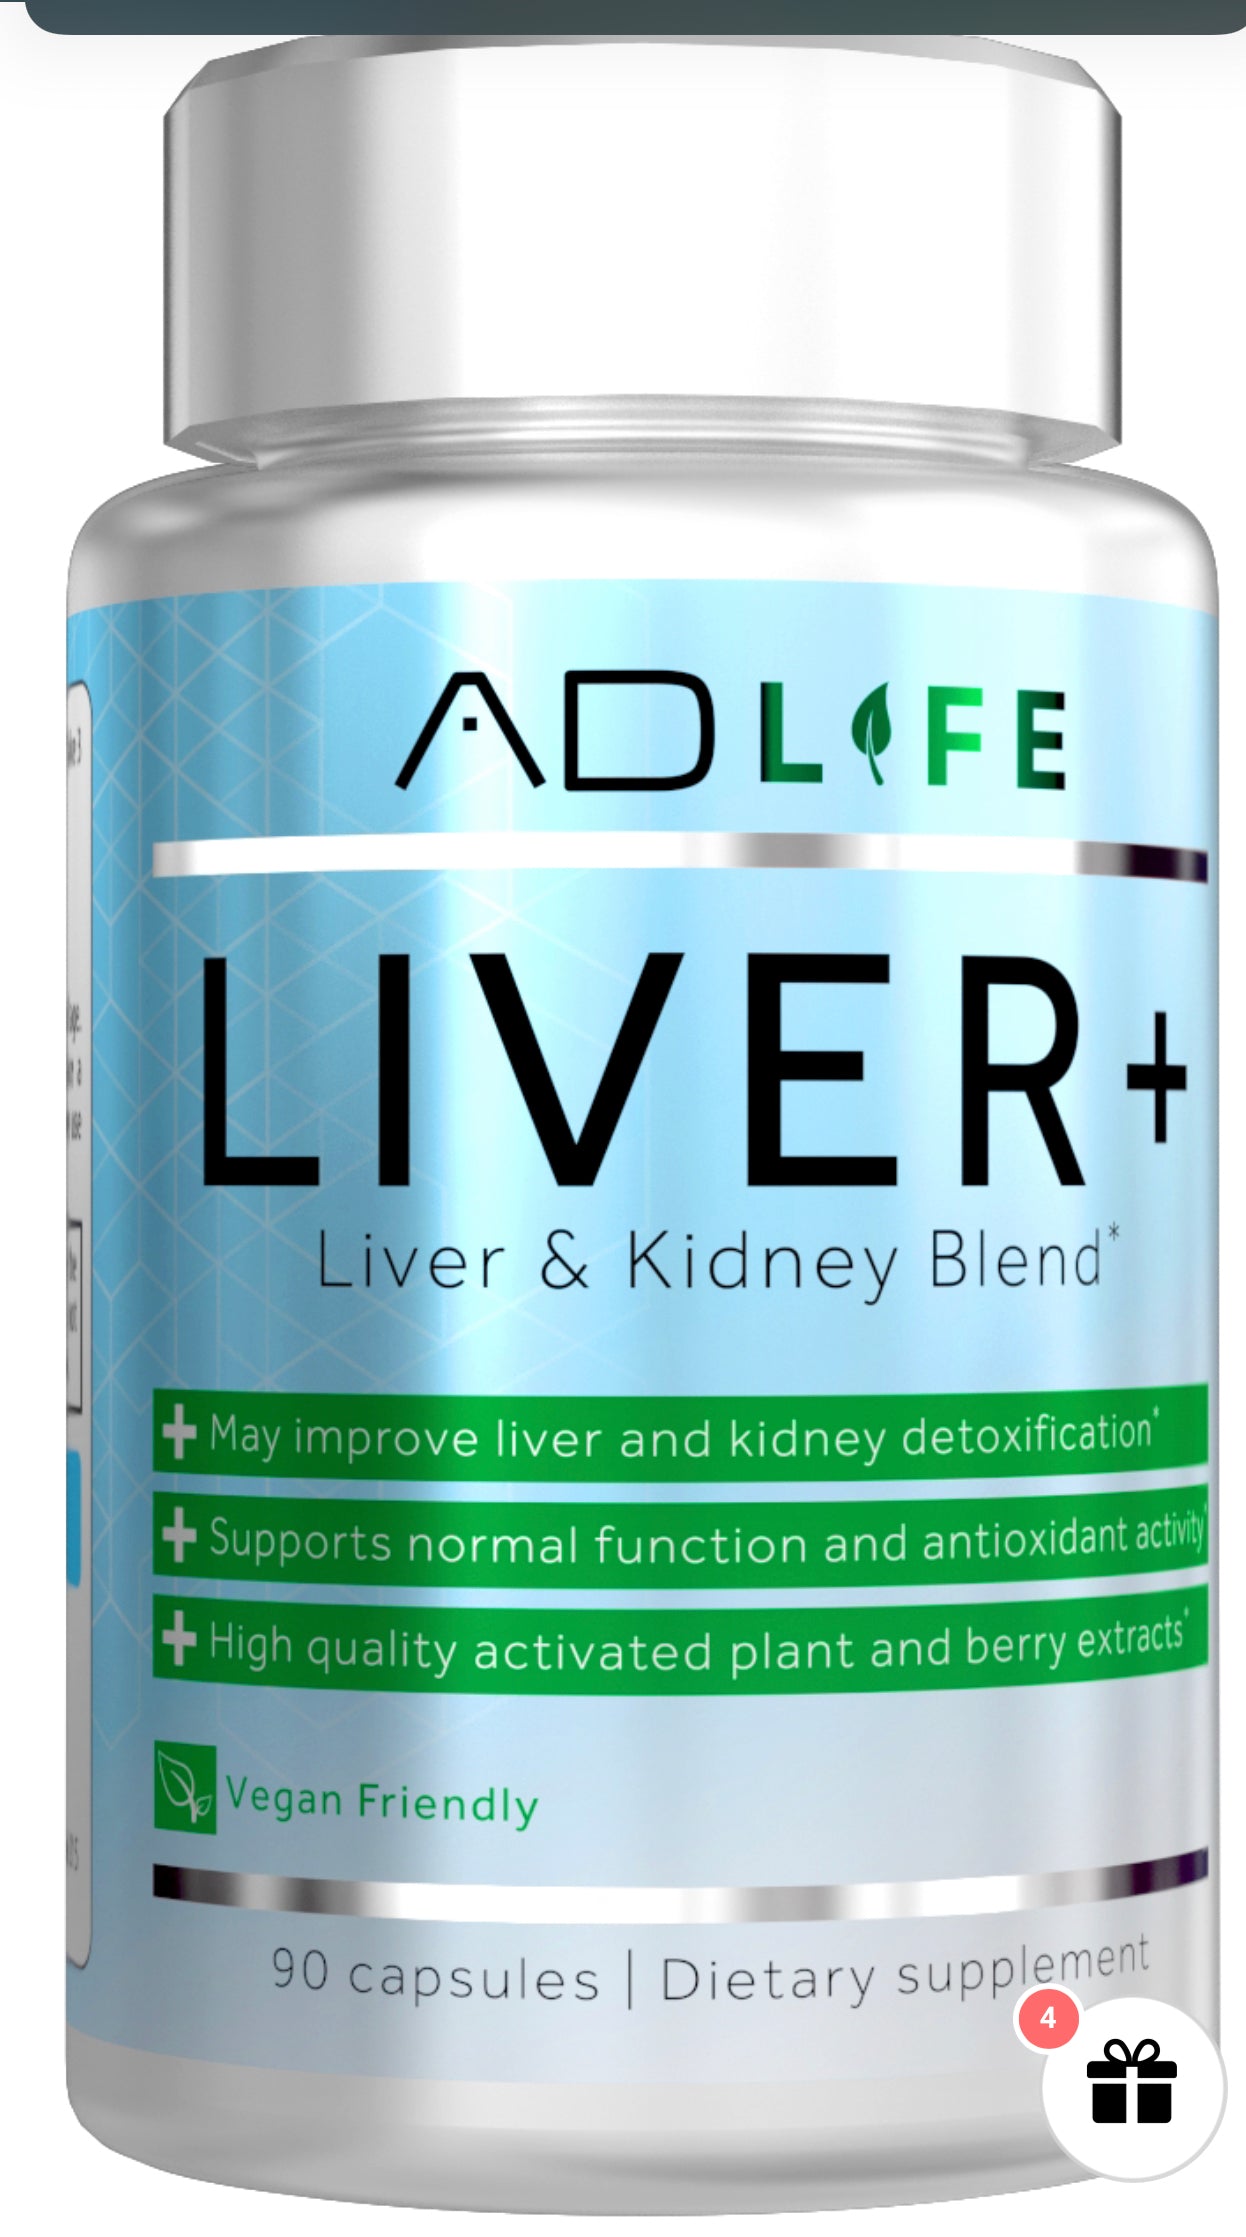 PROJECT AD LIFE LIVER+™ – LIVER SUPPORT